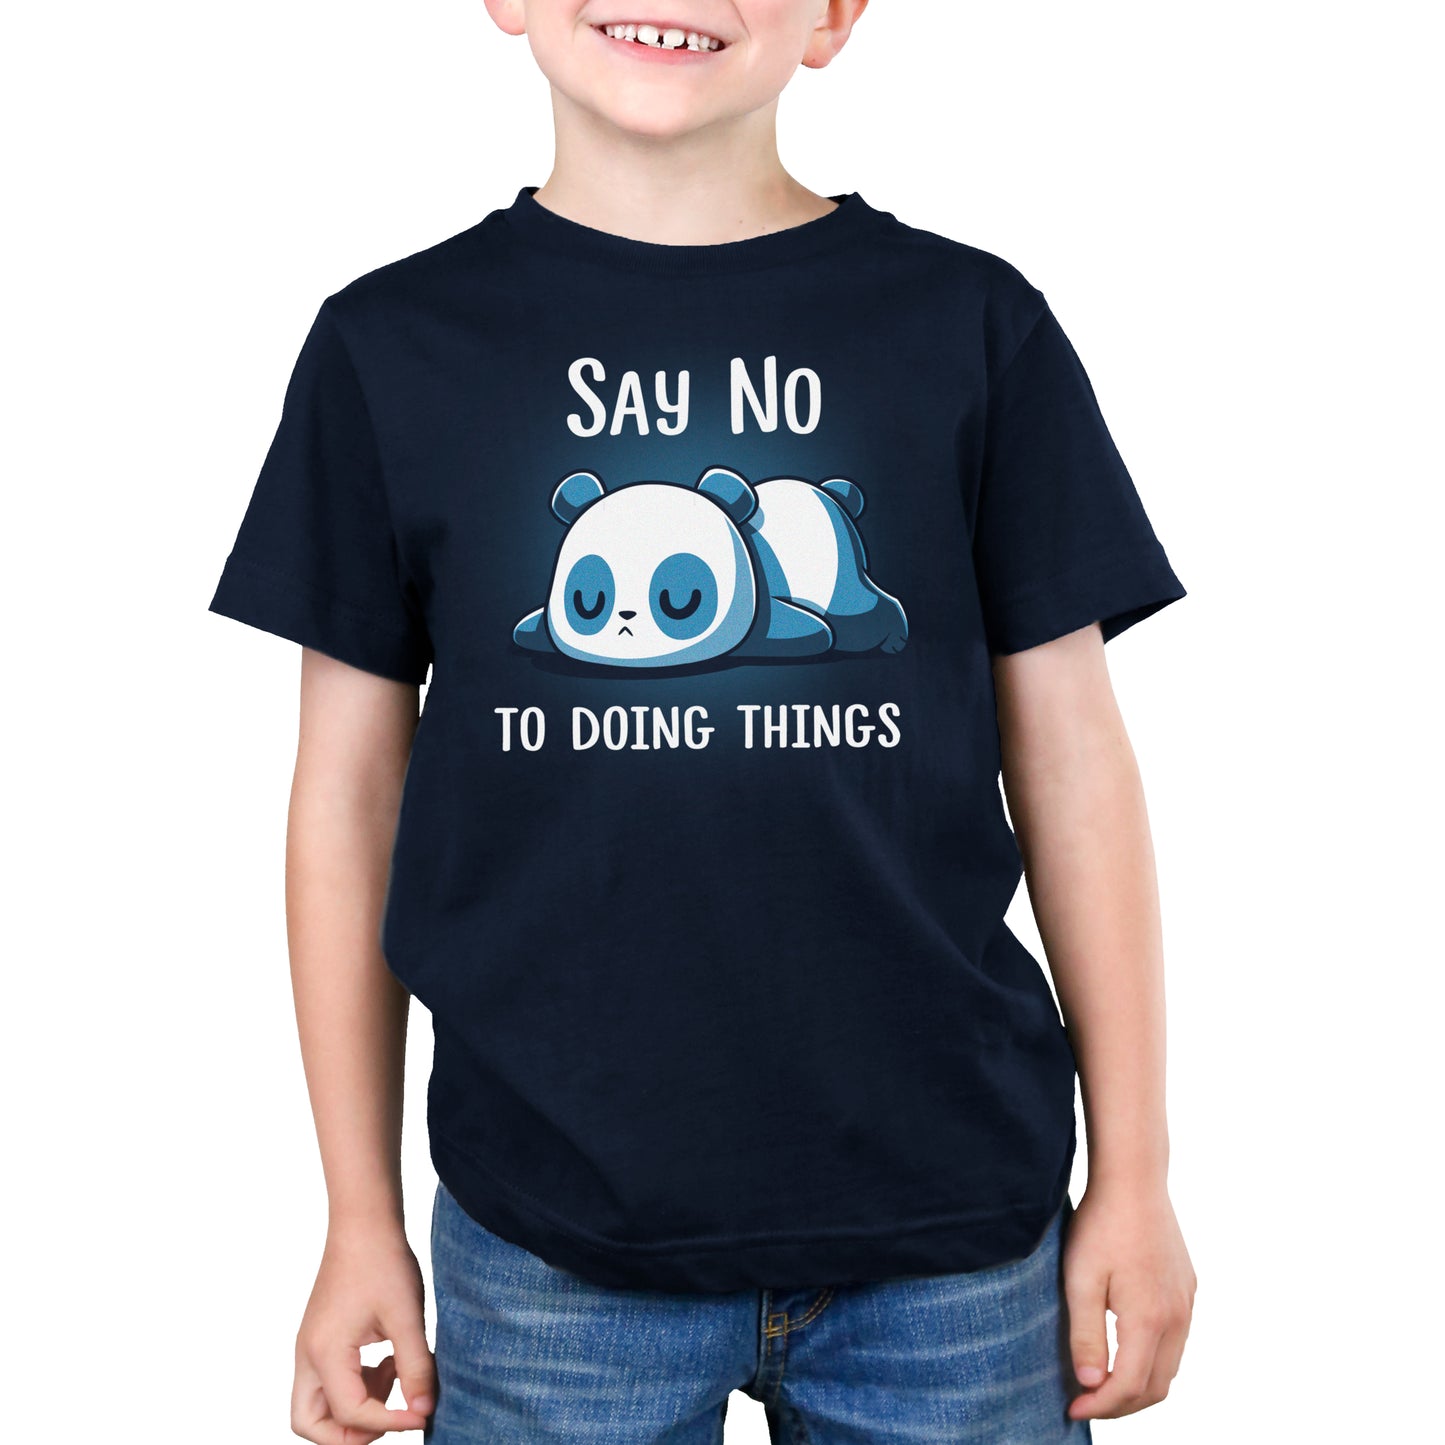 A comfortable boy wearing a Say No To Doing Things t-shirt from TeeTurtle.